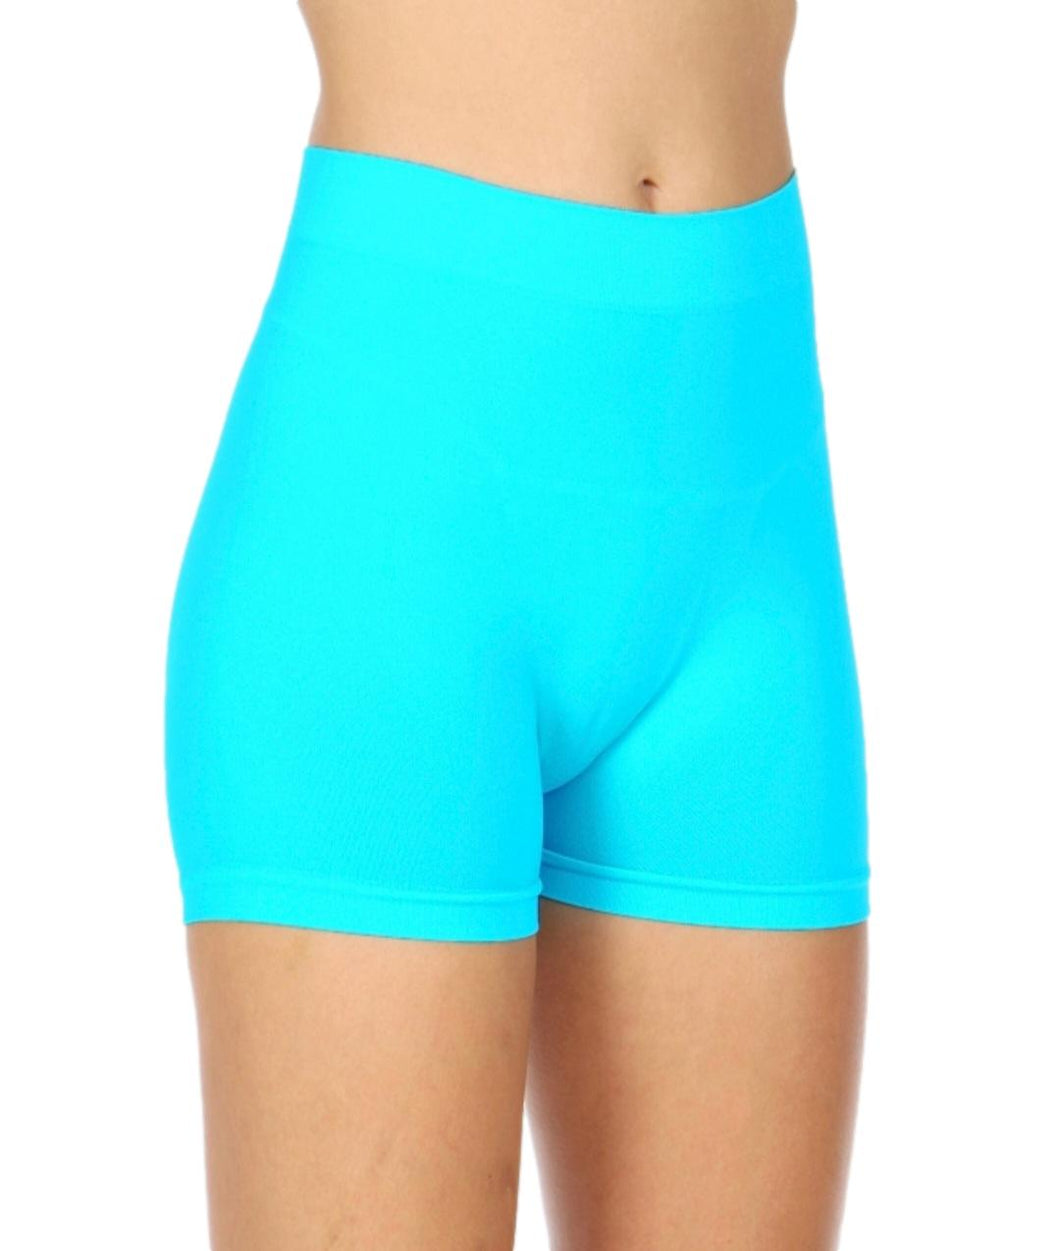 Women's Turquoise Blue Seamless Stretchy Knit Biker Shorts